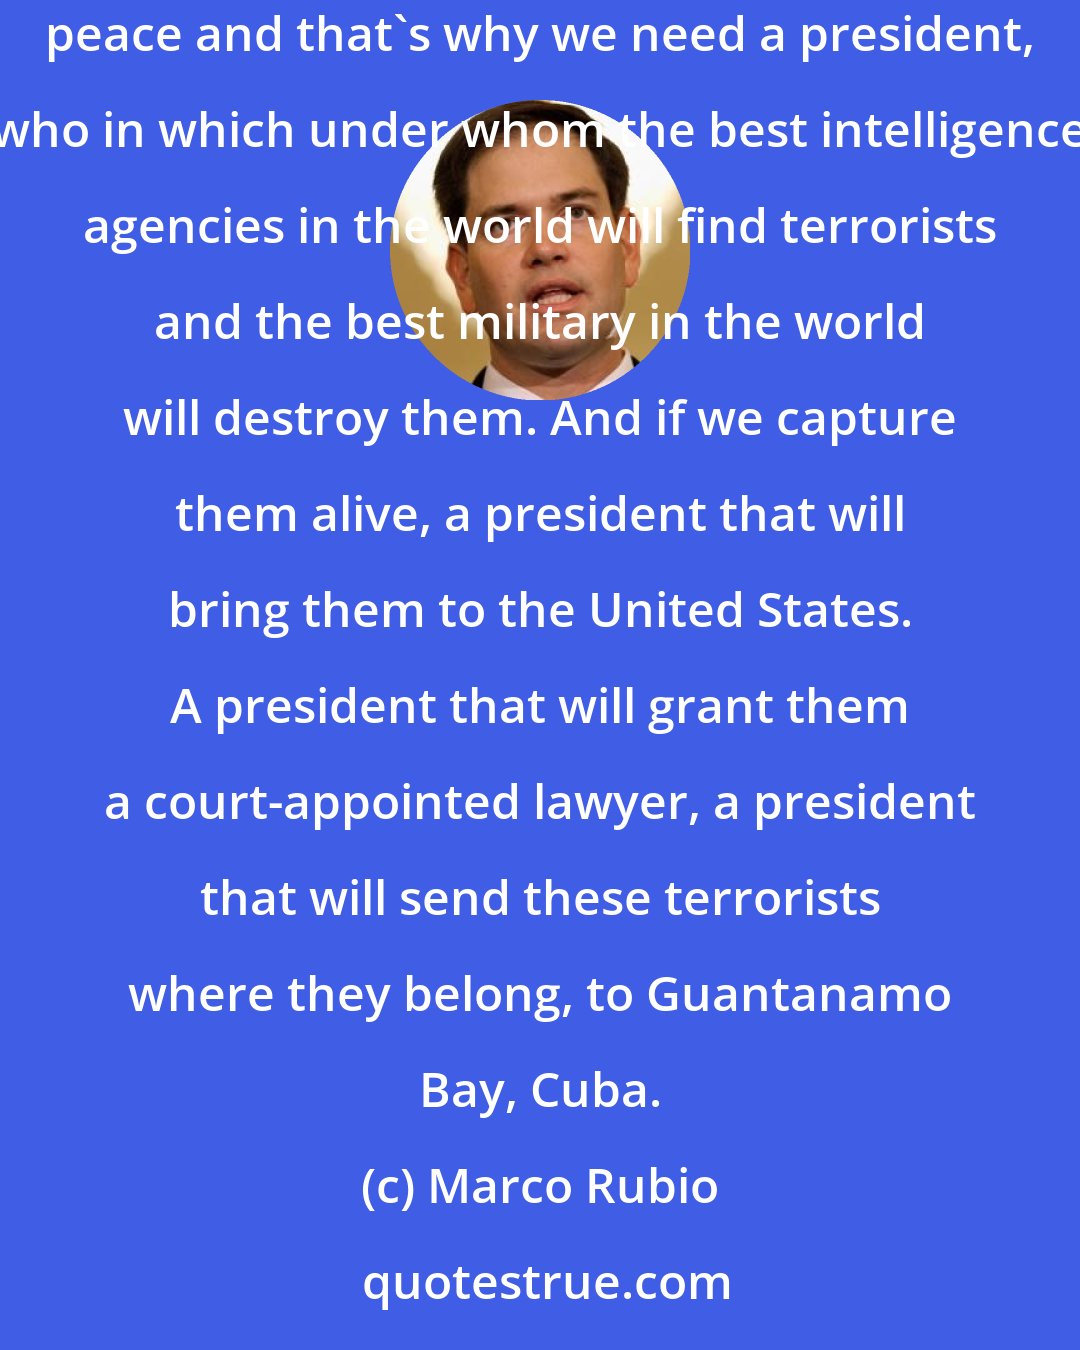 Marco Rubio: Conservatives believe that we need to defeat radical Islam not because we want war but because ISIS and other radical Islamist are enemies of peace and that's why we need a president, who in which under whom the best intelligence agencies in the world will find terrorists and the best military in the world will destroy them. And if we capture them alive, a president that will bring them to the United States. A president that will grant them a court-appointed lawyer, a president that will send these terrorists where they belong, to Guantanamo Bay, Cuba.